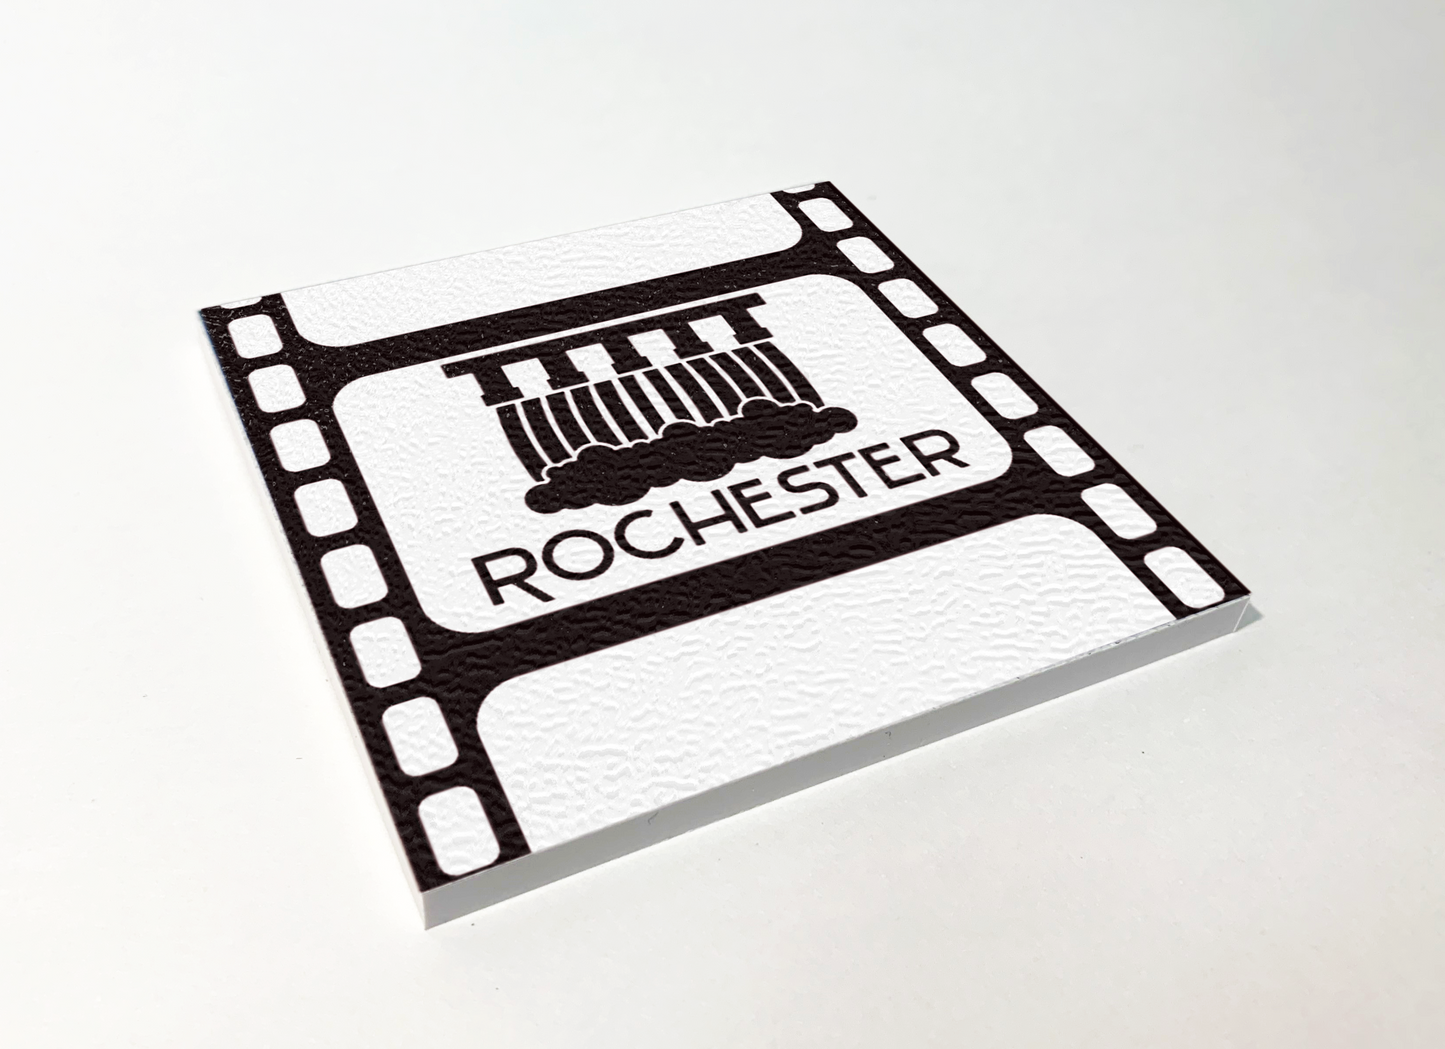 Rochester Upper Falls Filmstrip ABS Plastic Coaster 4 Pack Designed and Handcrafted in Buffalo NY